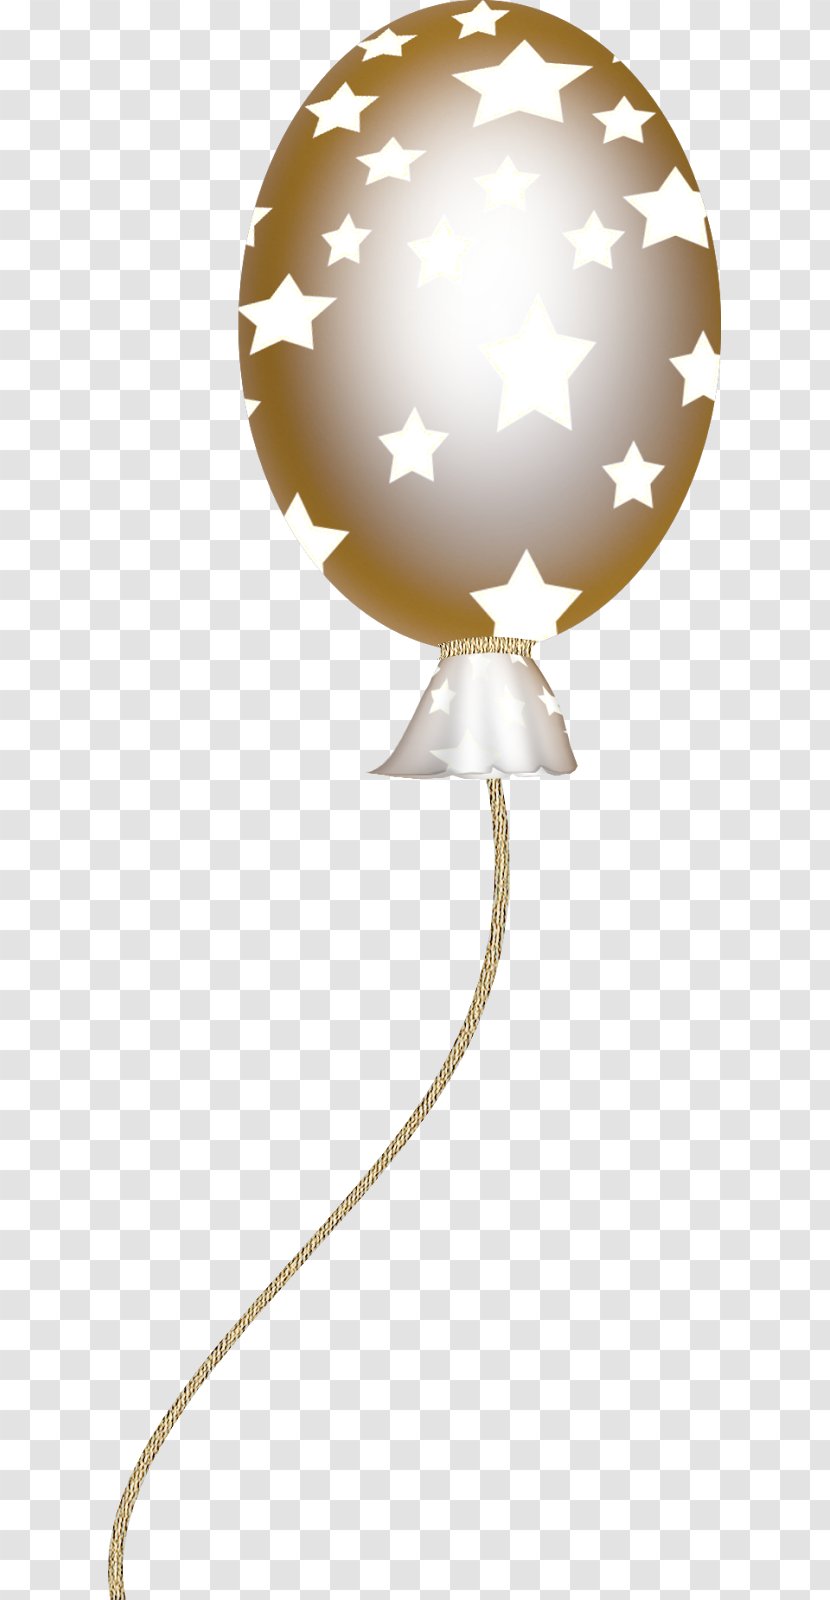 Happy Birthday To You Anniversary Balloon Clip Art - Greeting Note Cards Transparent PNG